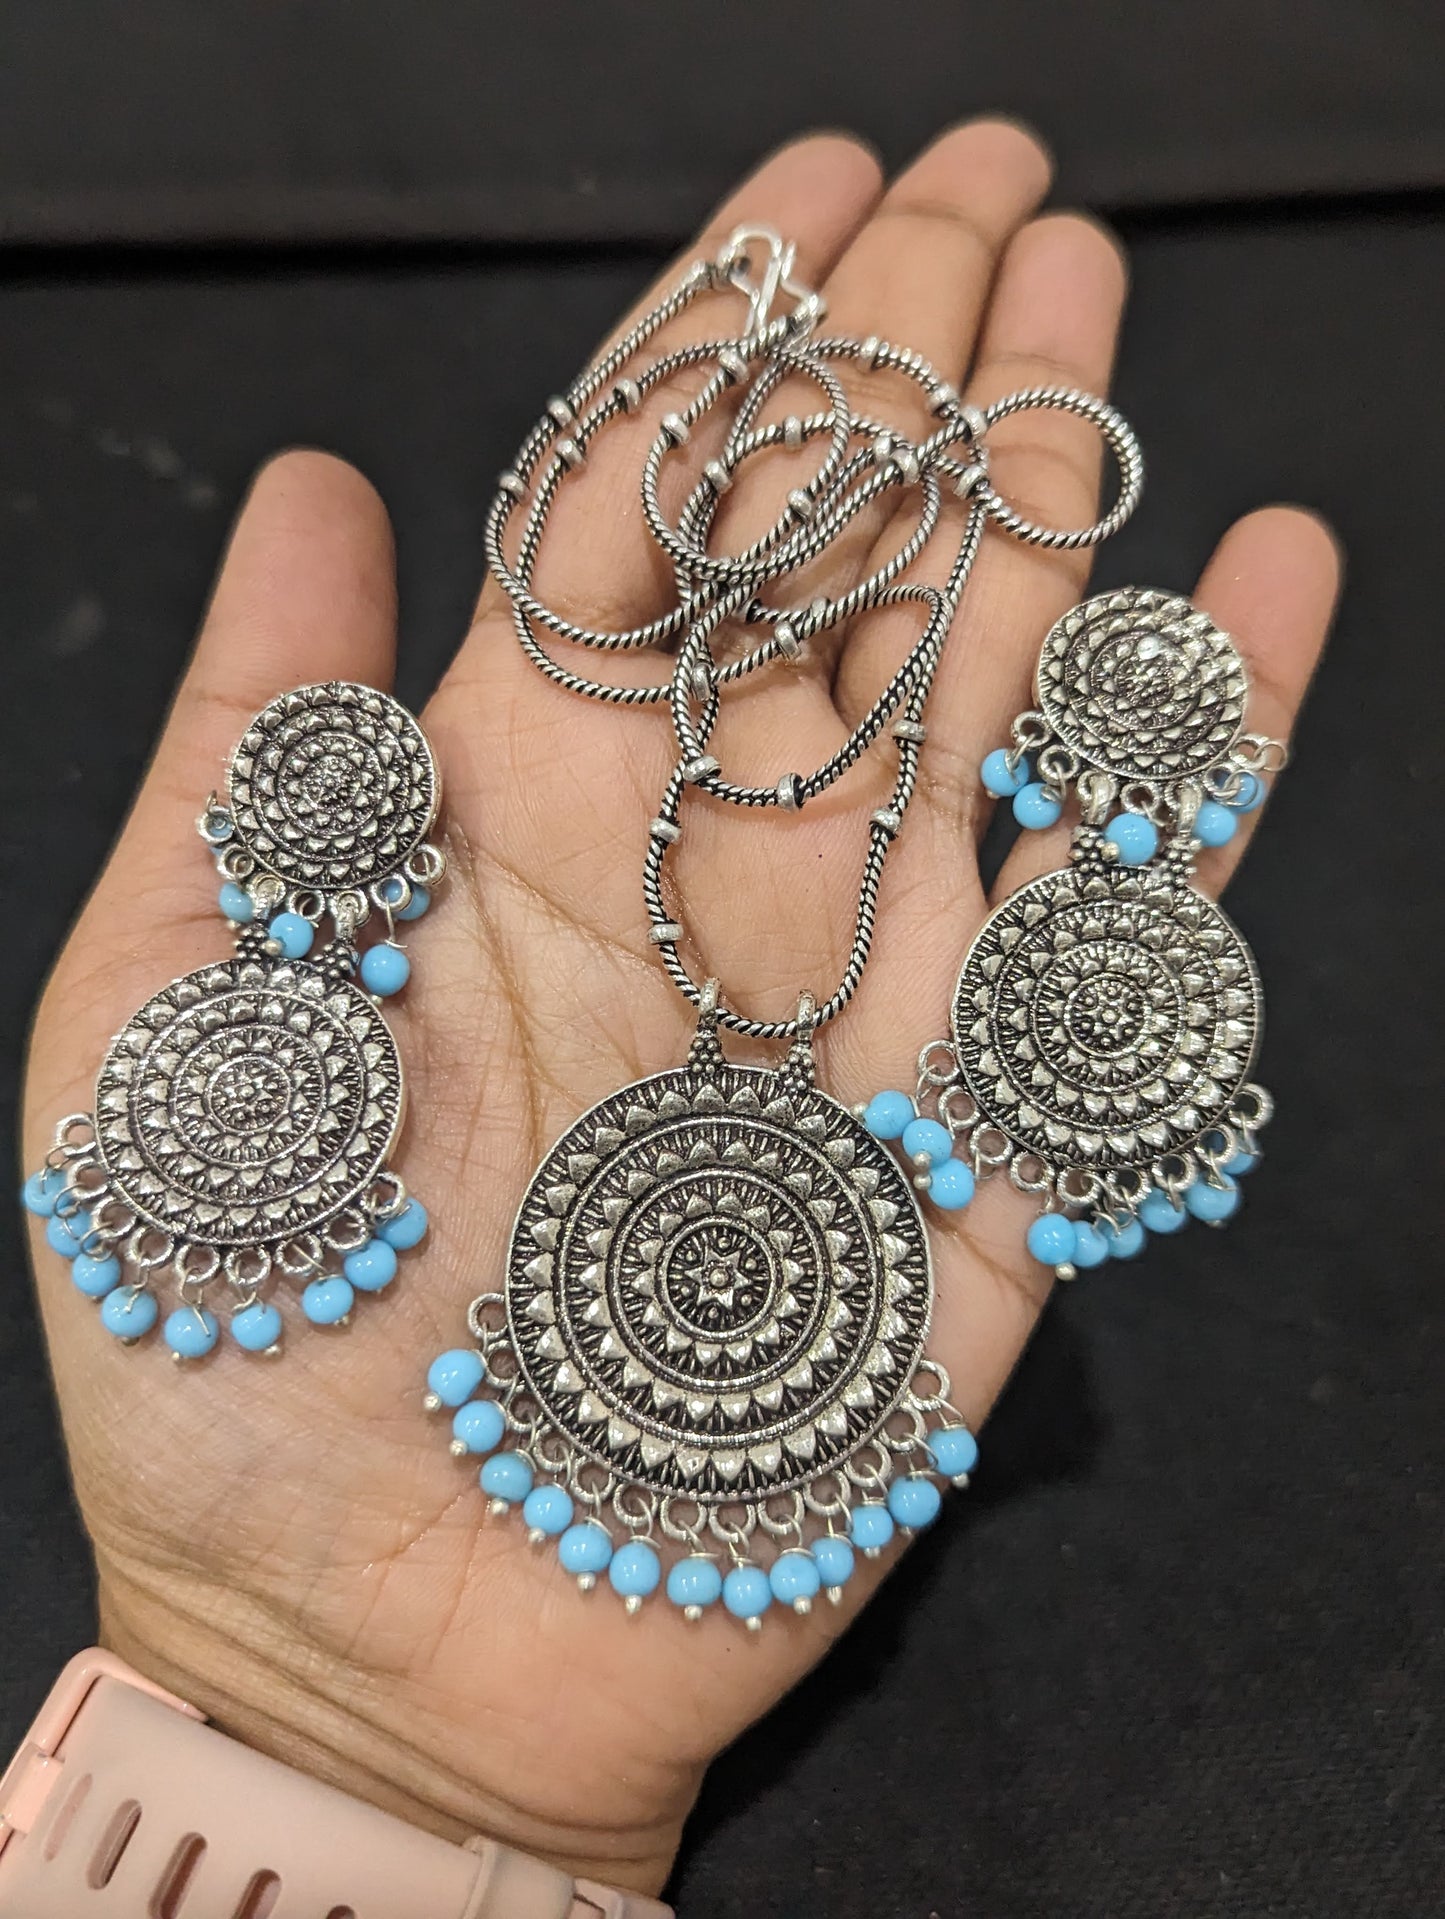 Oxidized Silver Round pendant and Earrings set